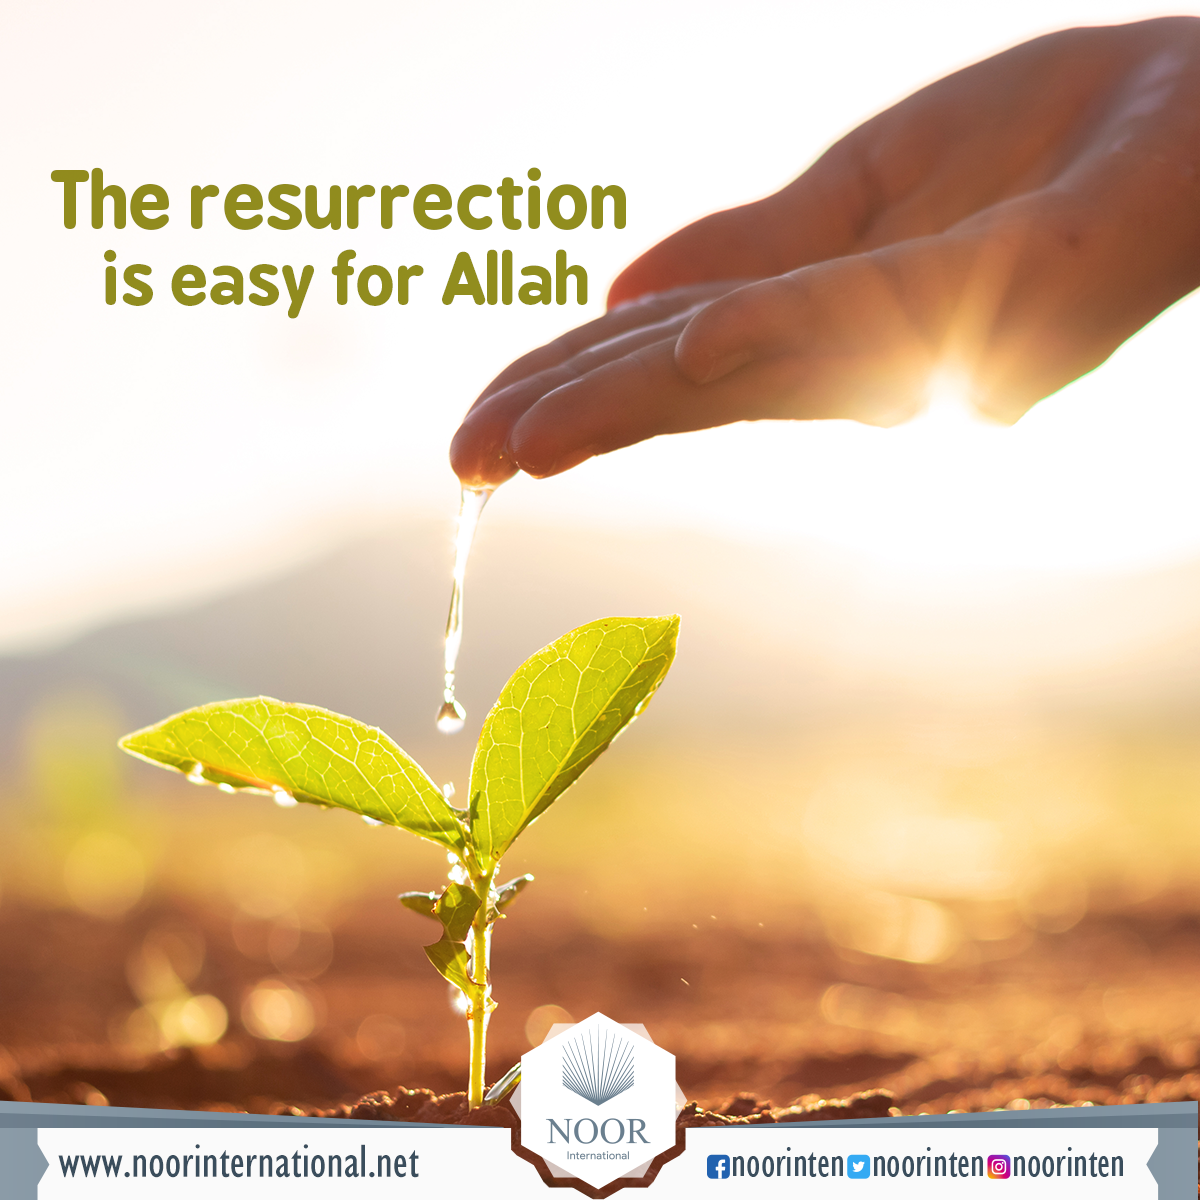 The resurrection is easy for Allah